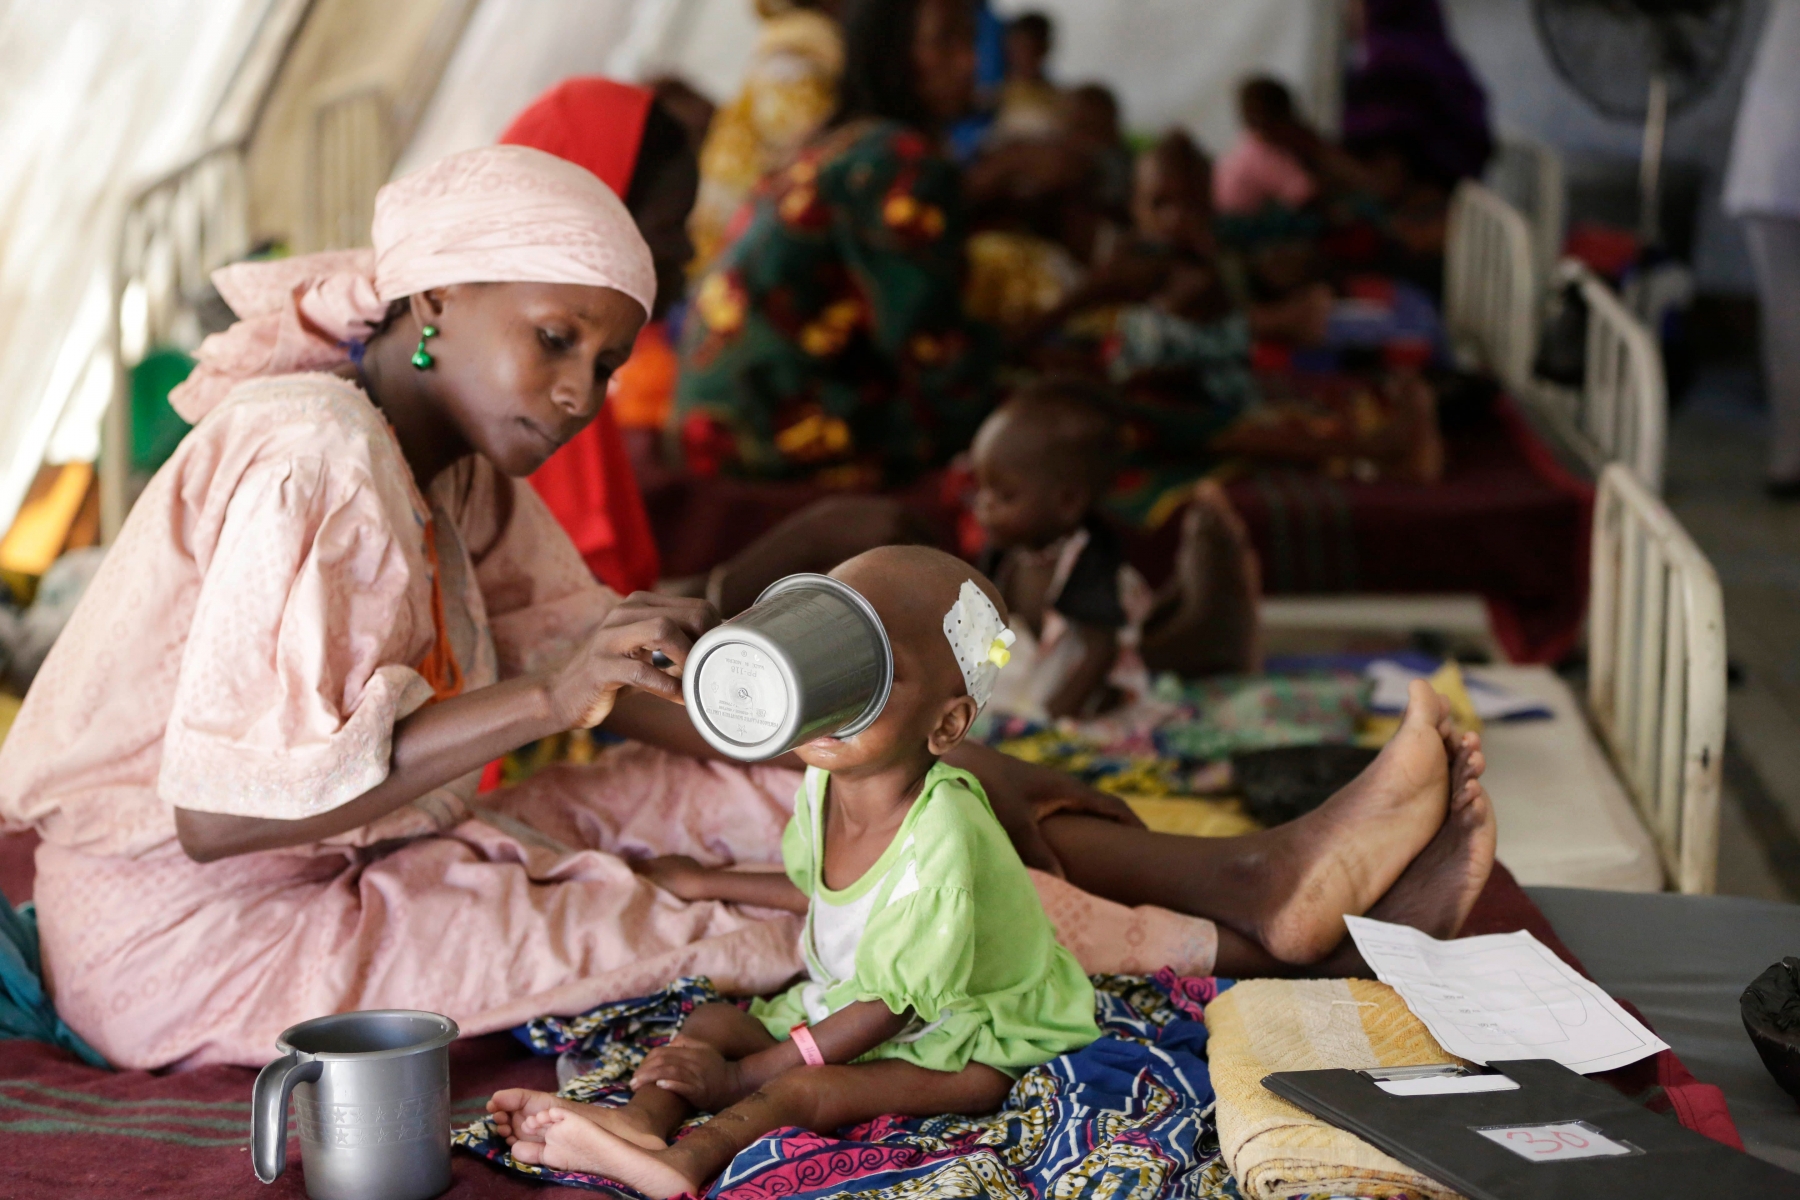 FILE - In this Monday, Aug. 29, 2016 file photo, a mother feeds her malnourished child at a feeding centre run by Doctors Without Borders in Maiduguri, Nigeria. The United Nations children's agency warned Tuesday, Feb. 21, 2017 that almost 1.4 million children are at "imminent risk of death" as famine threatens parts of South Sudan, Nigeria, Somalia and Yemen. (AP Photo/Sunday Alamba, File) Africa Famine